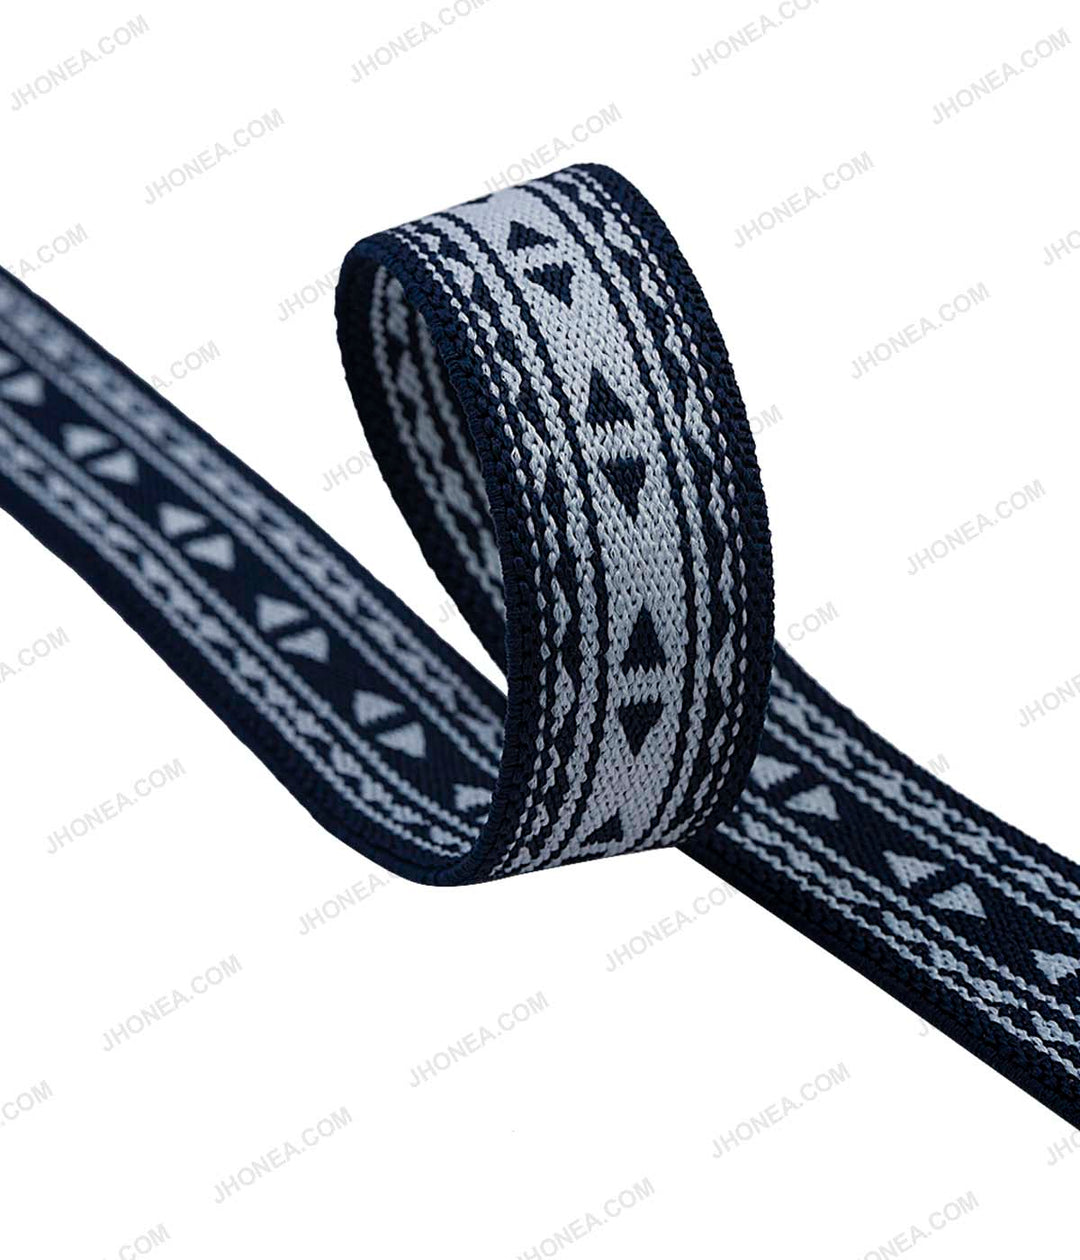 2cm/20mm Navy Blue with White Boho Style Woven Elastic